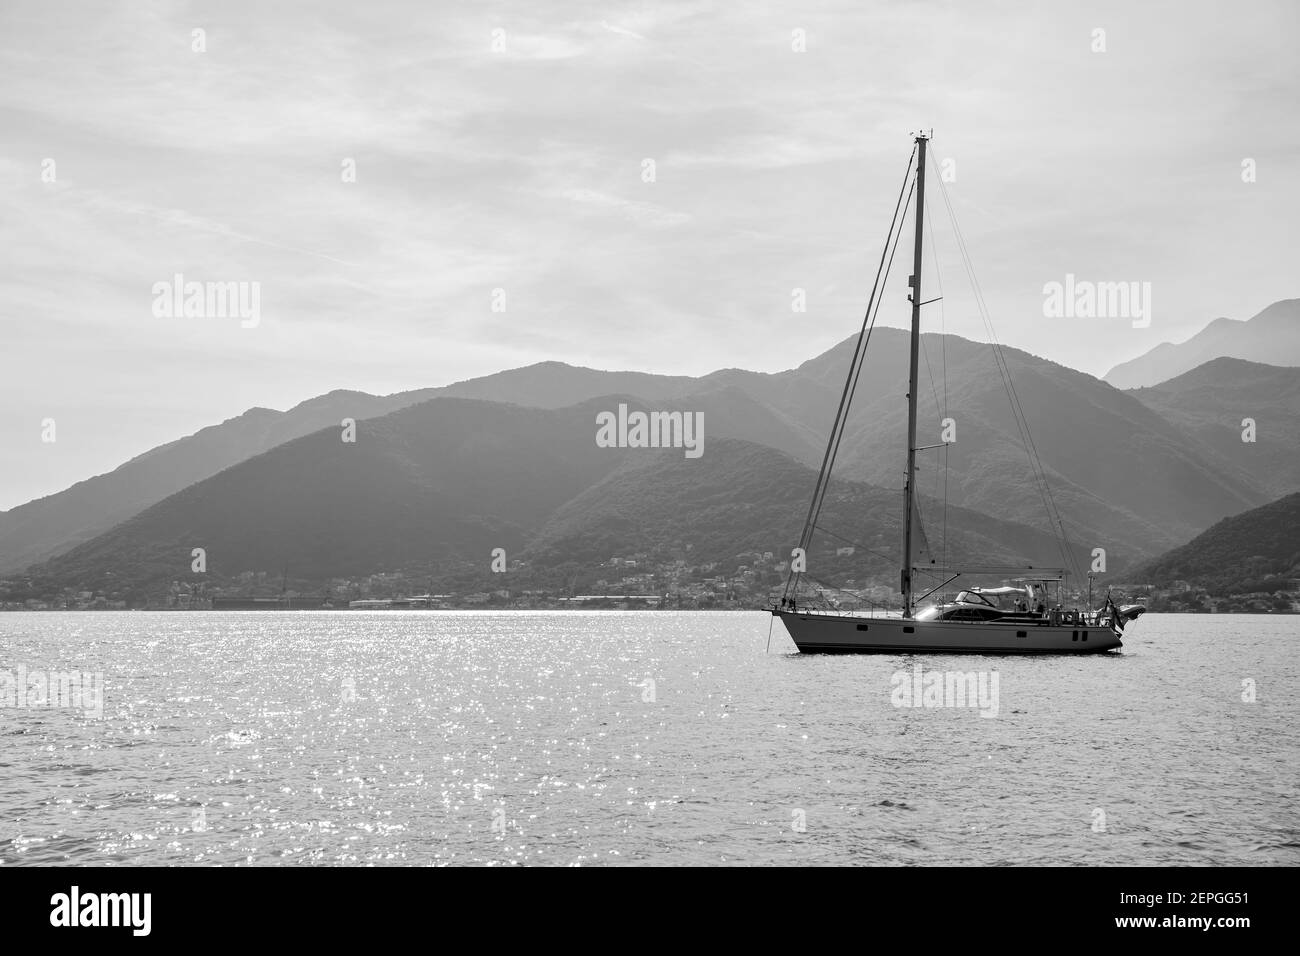 Sail yacht with tall mast in the sea off the shore. Seascape, black and white photography Stock Photo